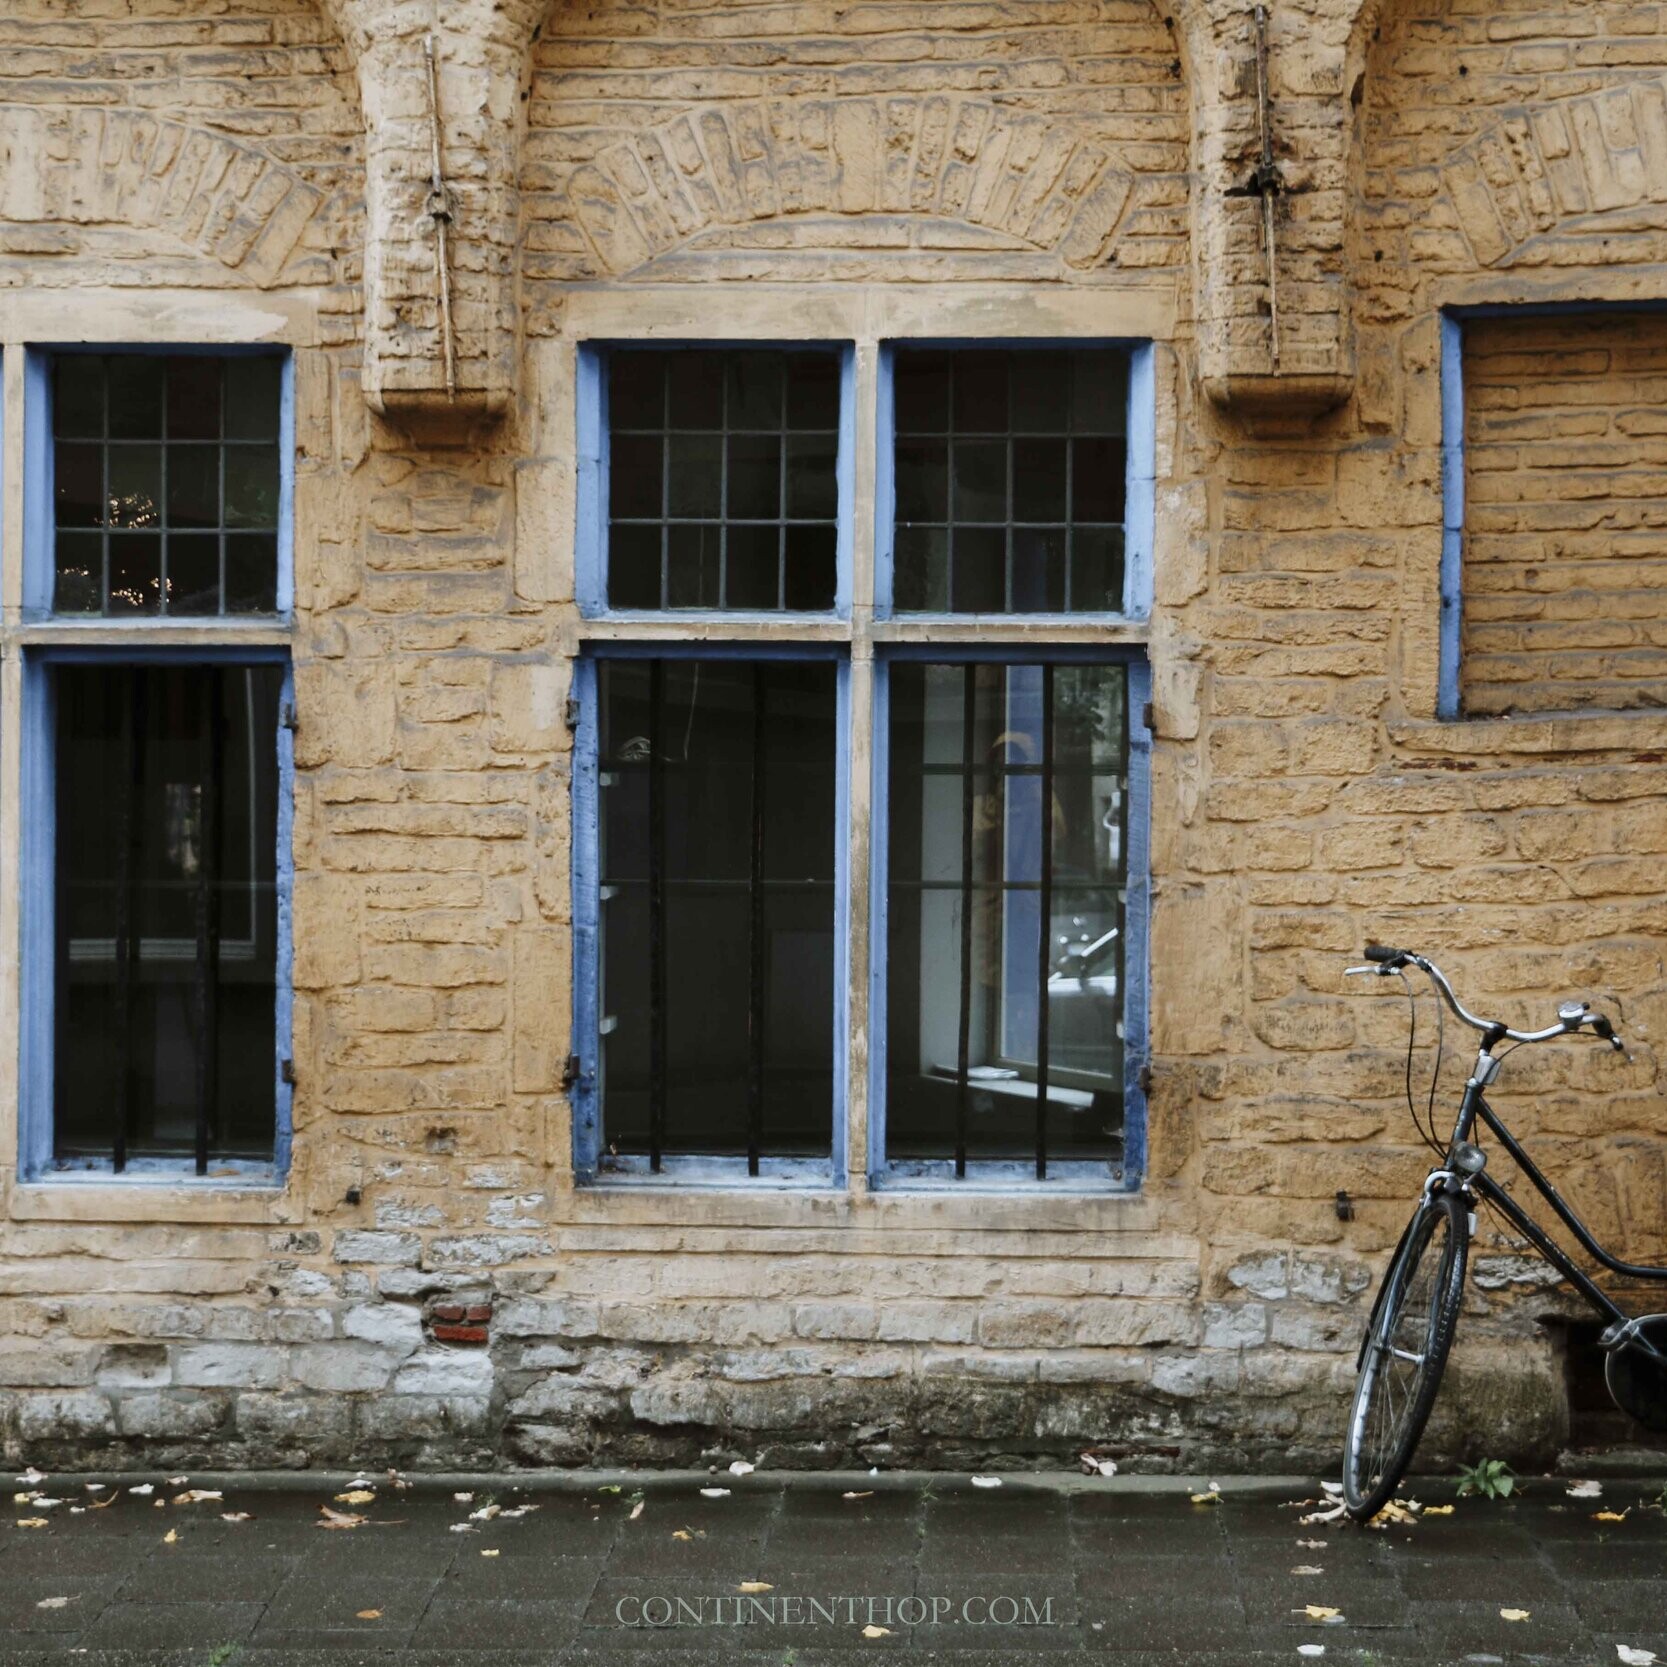 A bicycle leaning on a yellow wall in Gent